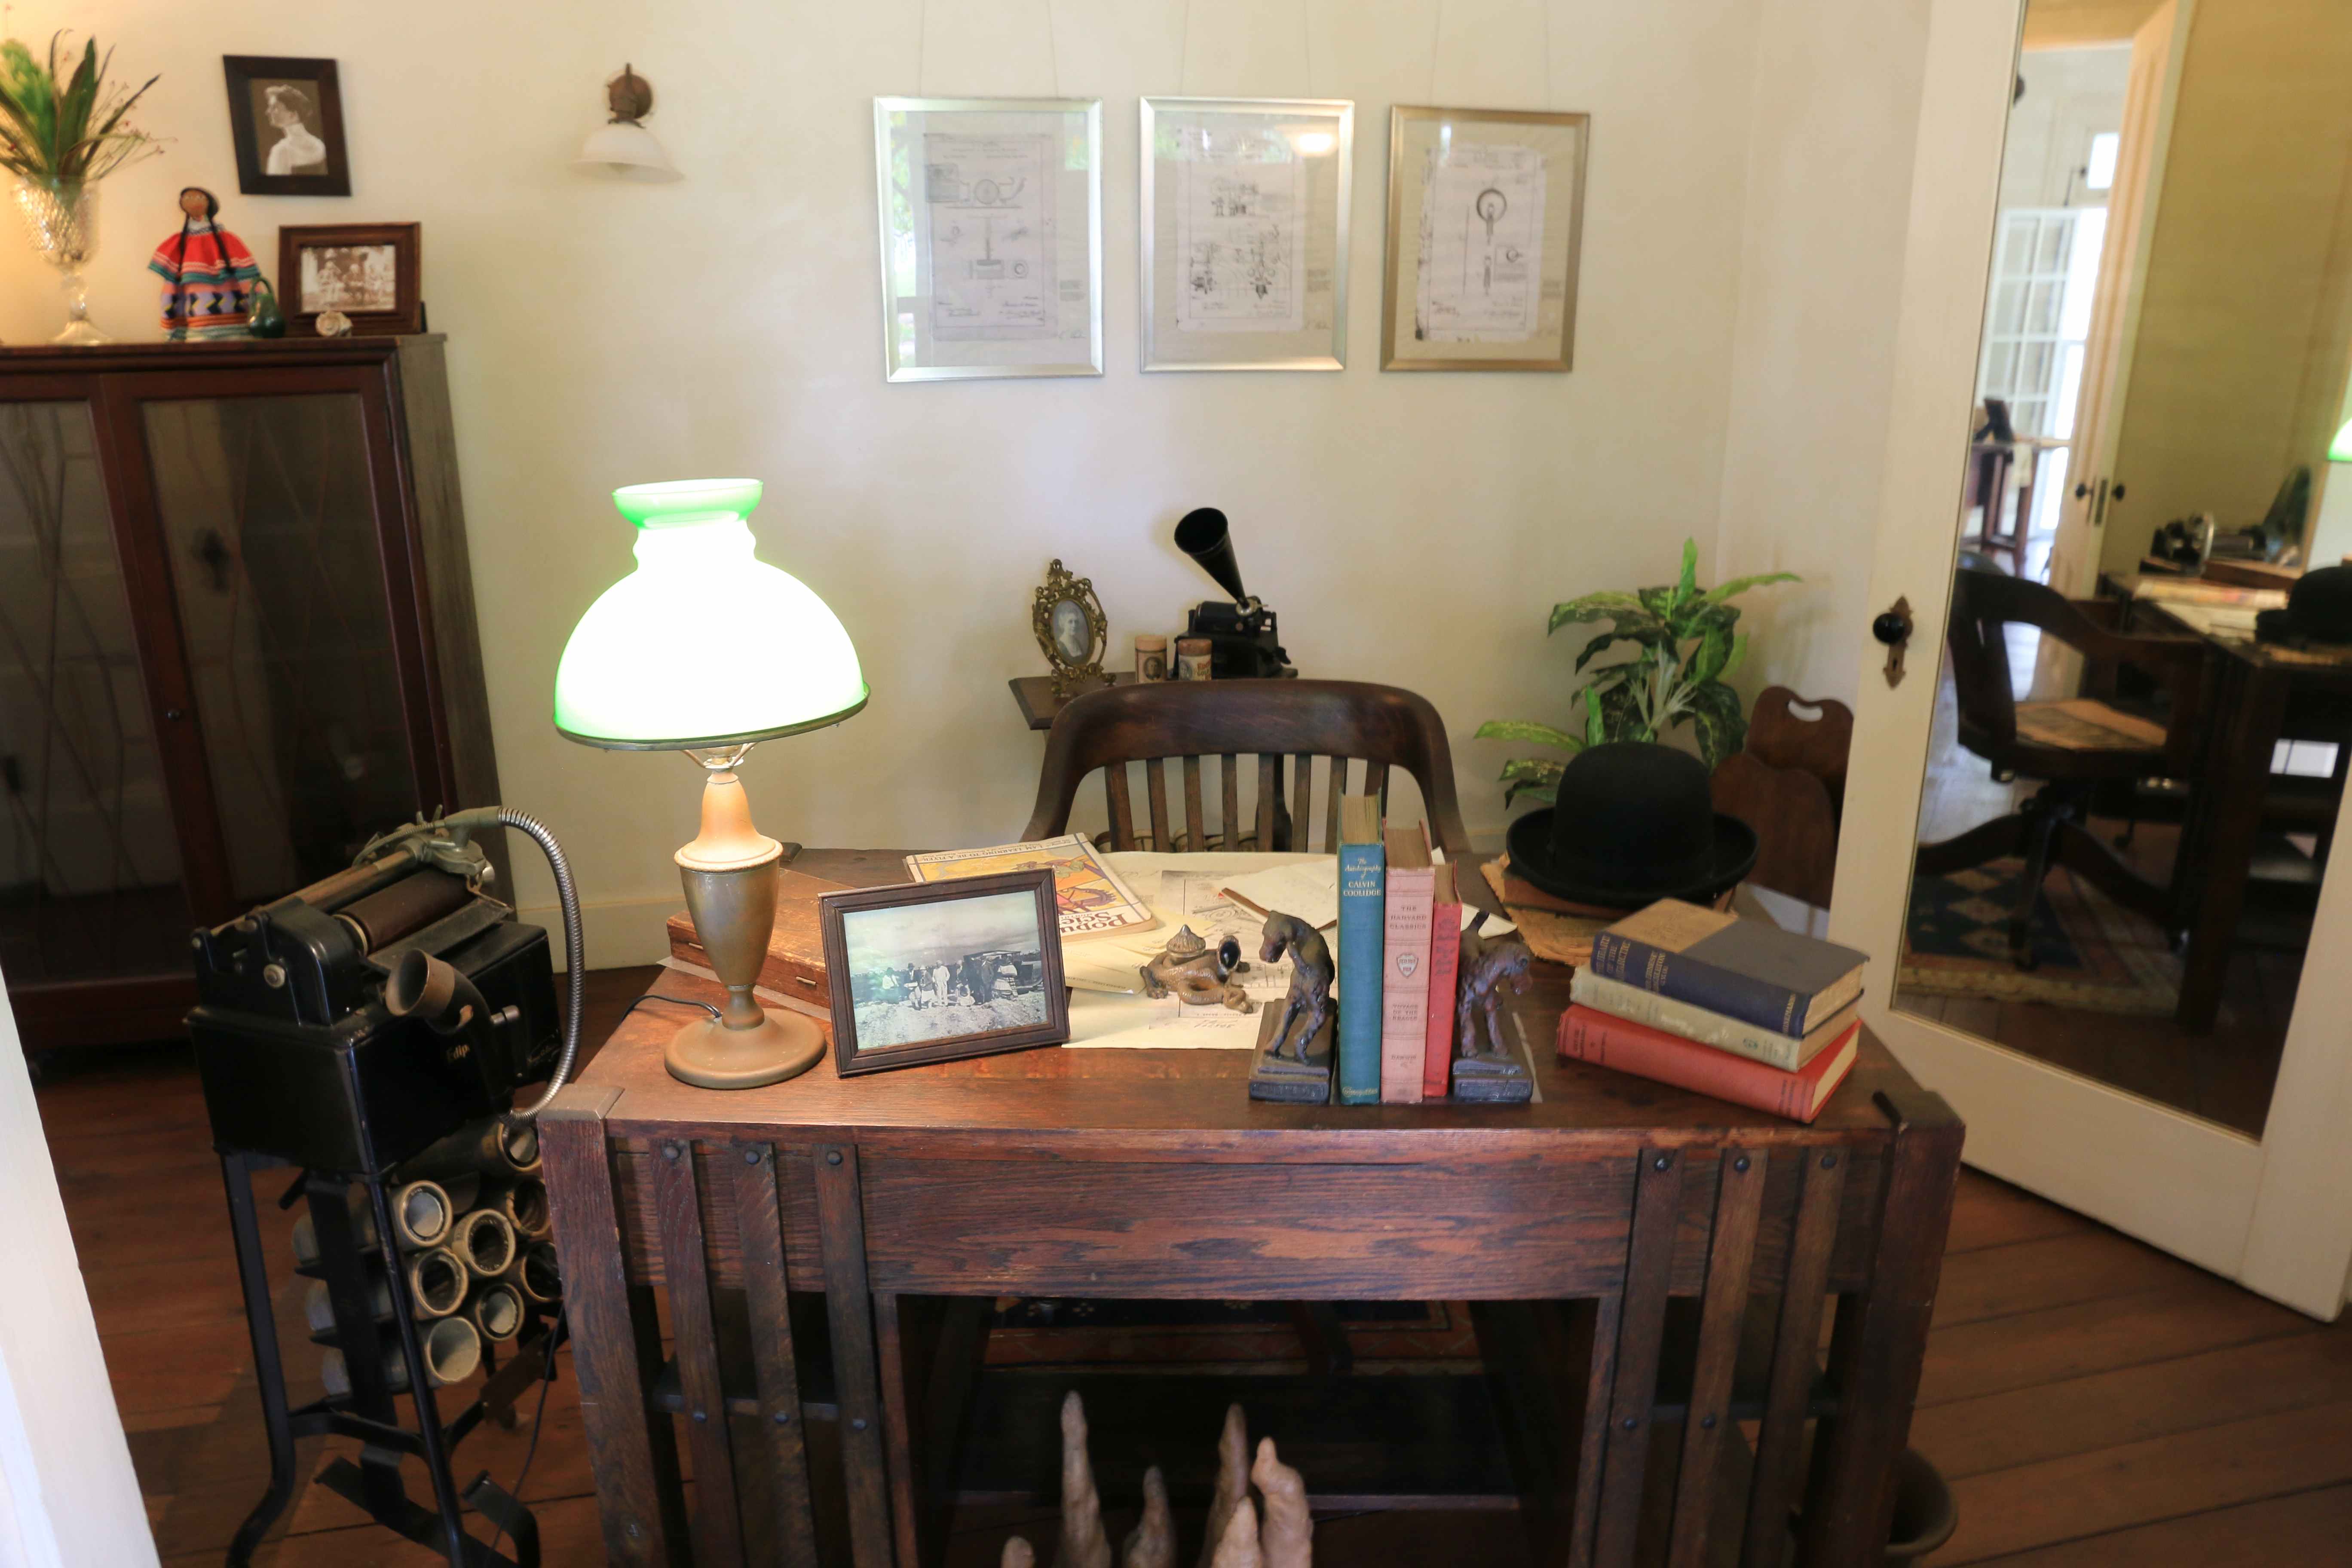 Study in Edison's house